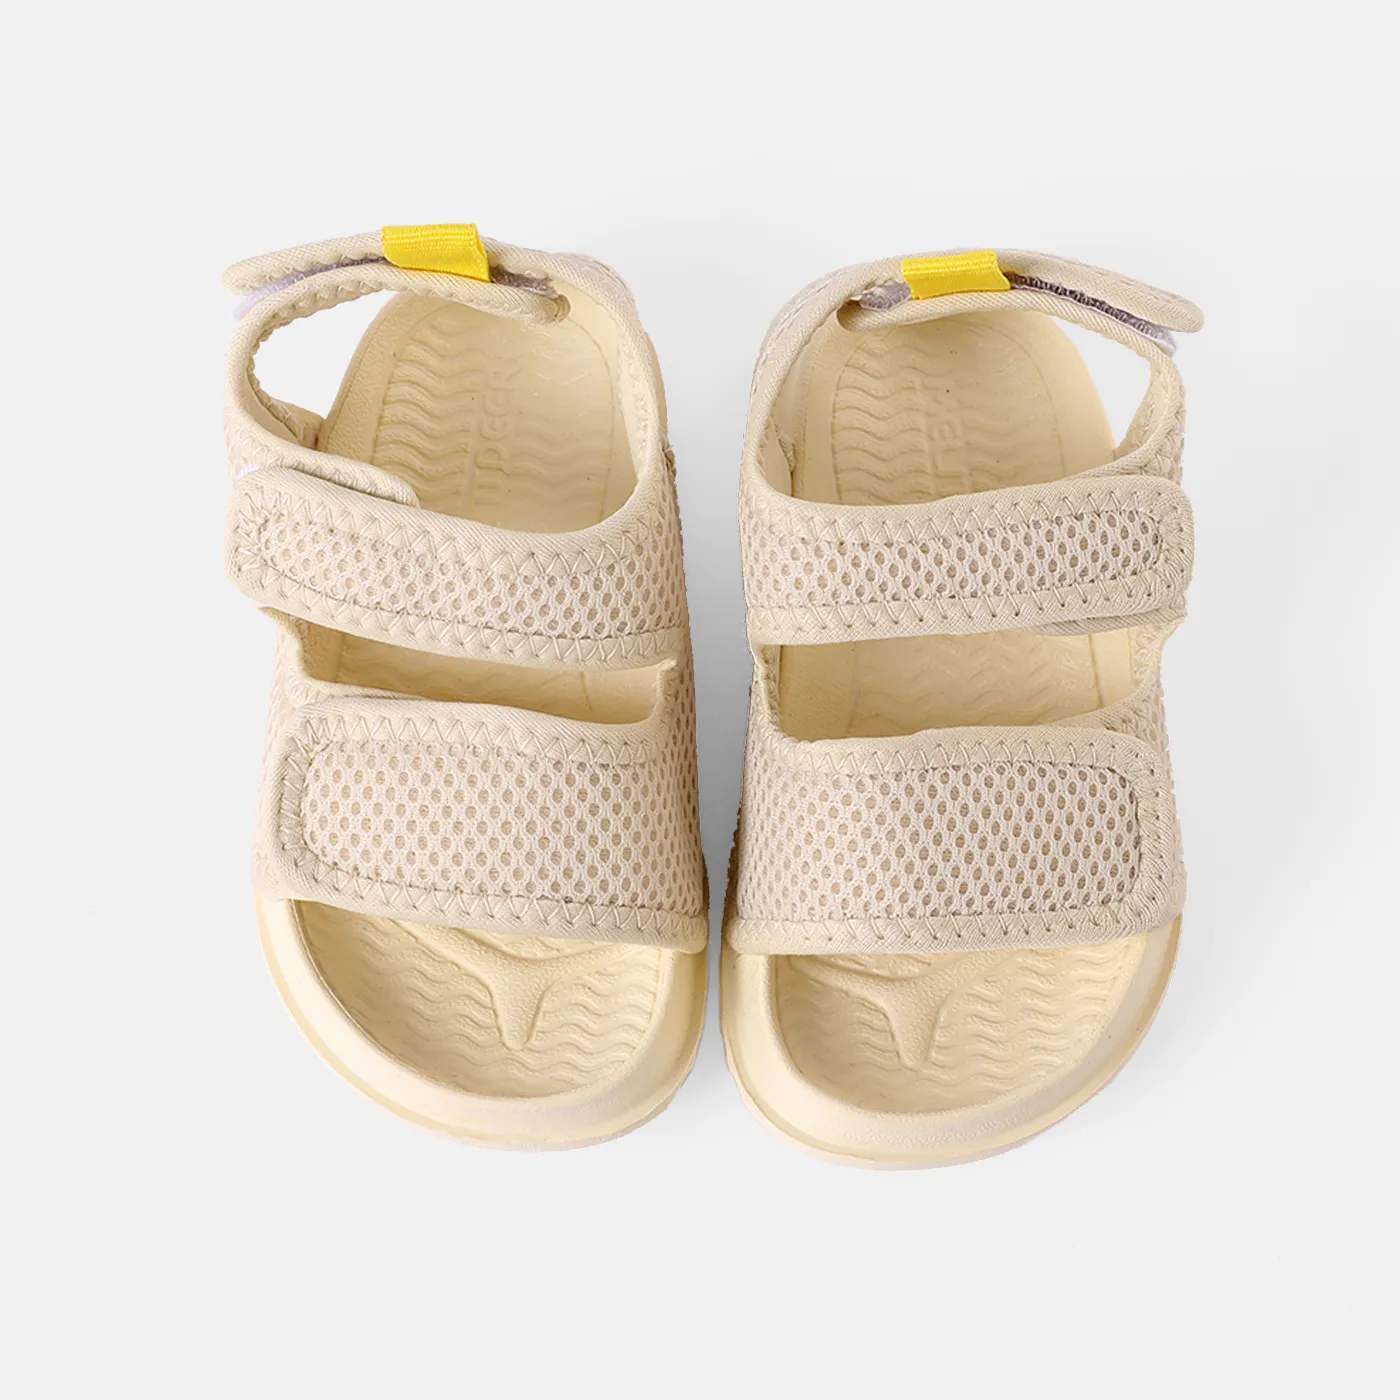 Toddler / Kid Soft Sole Open Toe Dual Velcro Sandals